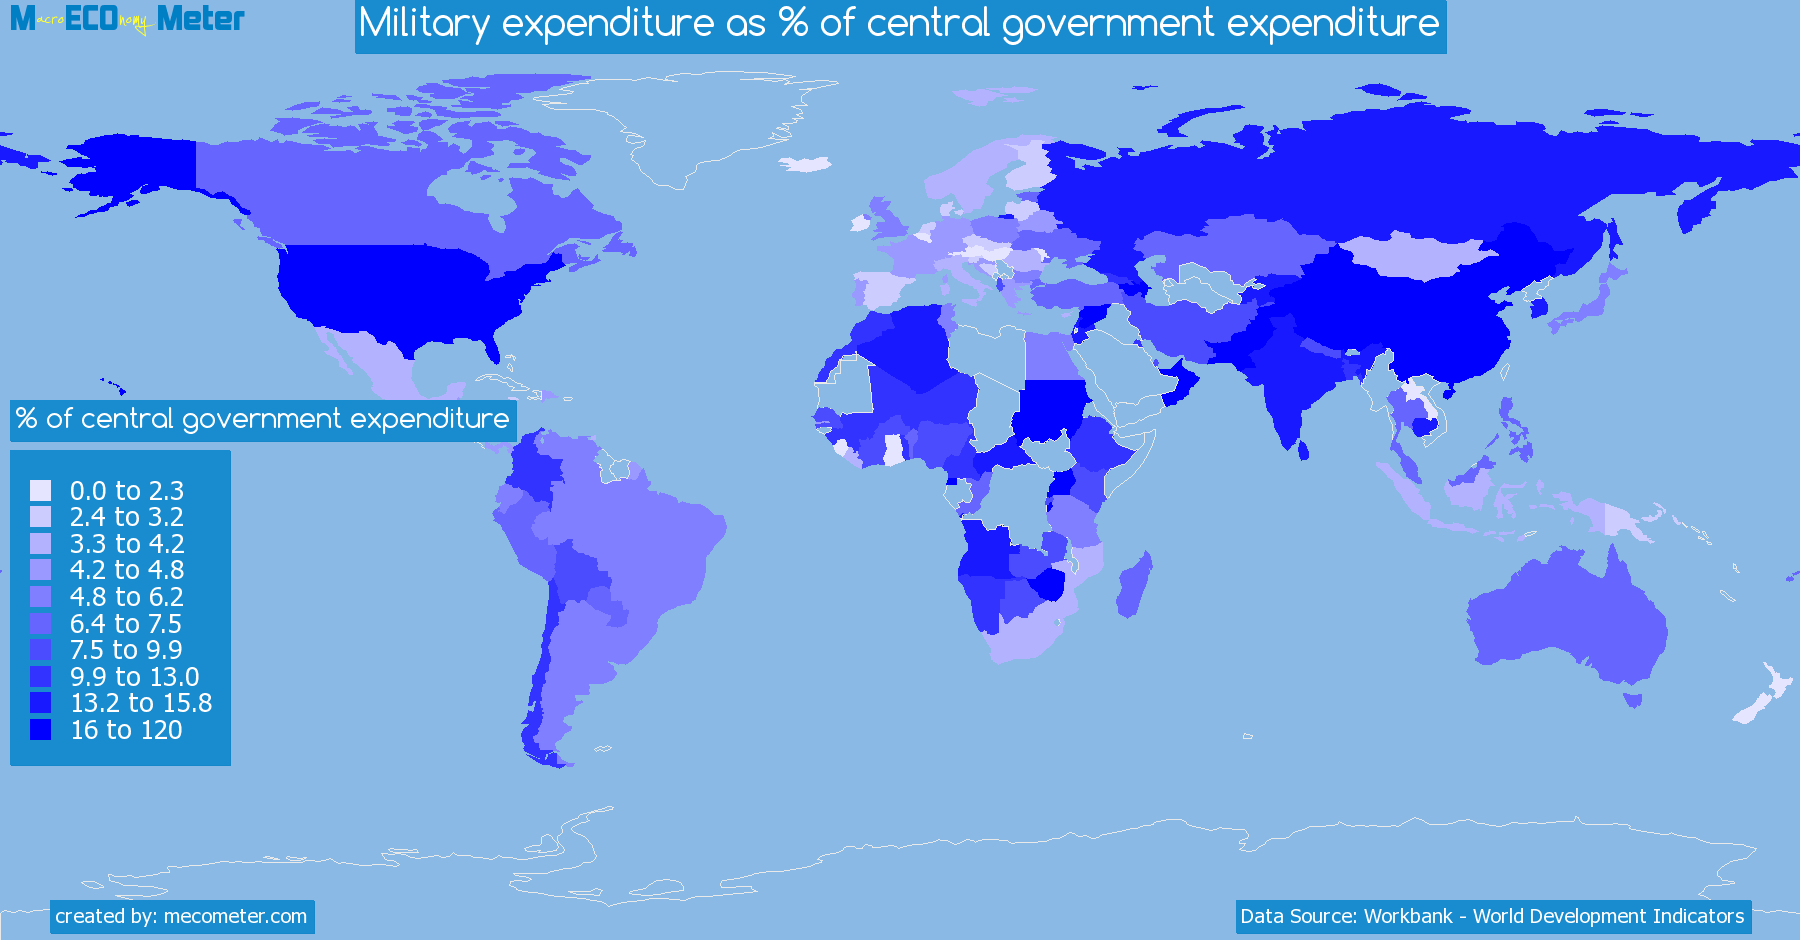 Worldmap of all countries colored to reflect the values of Military expenditure as % of central government expenditure